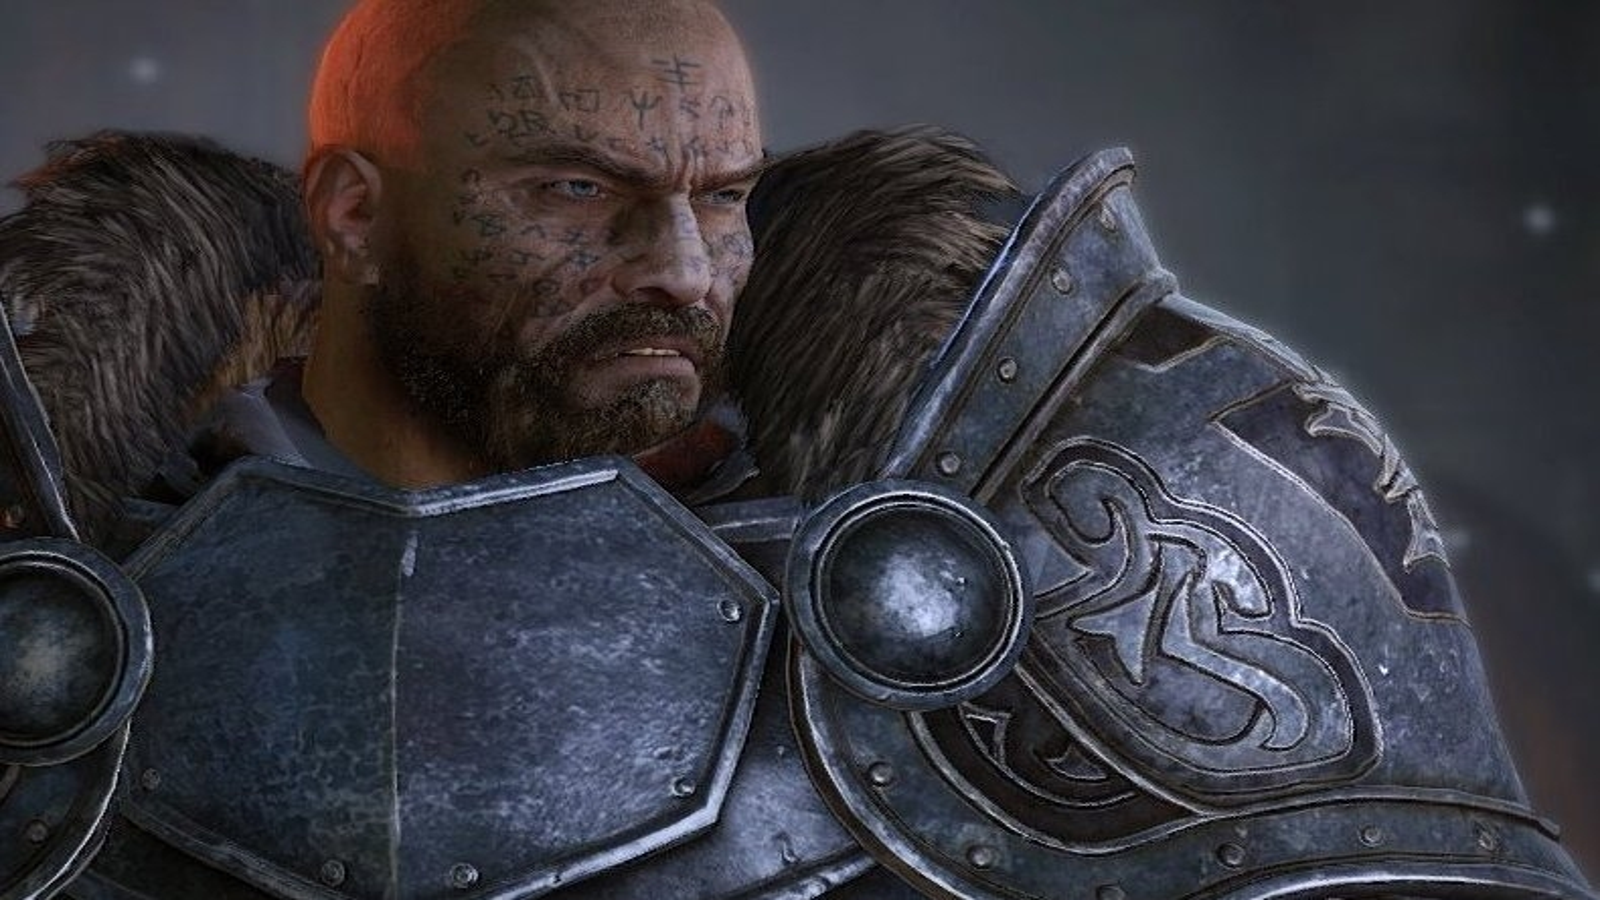 Lords of the Fallen Update Targets Performance and AI Fixes, Patch